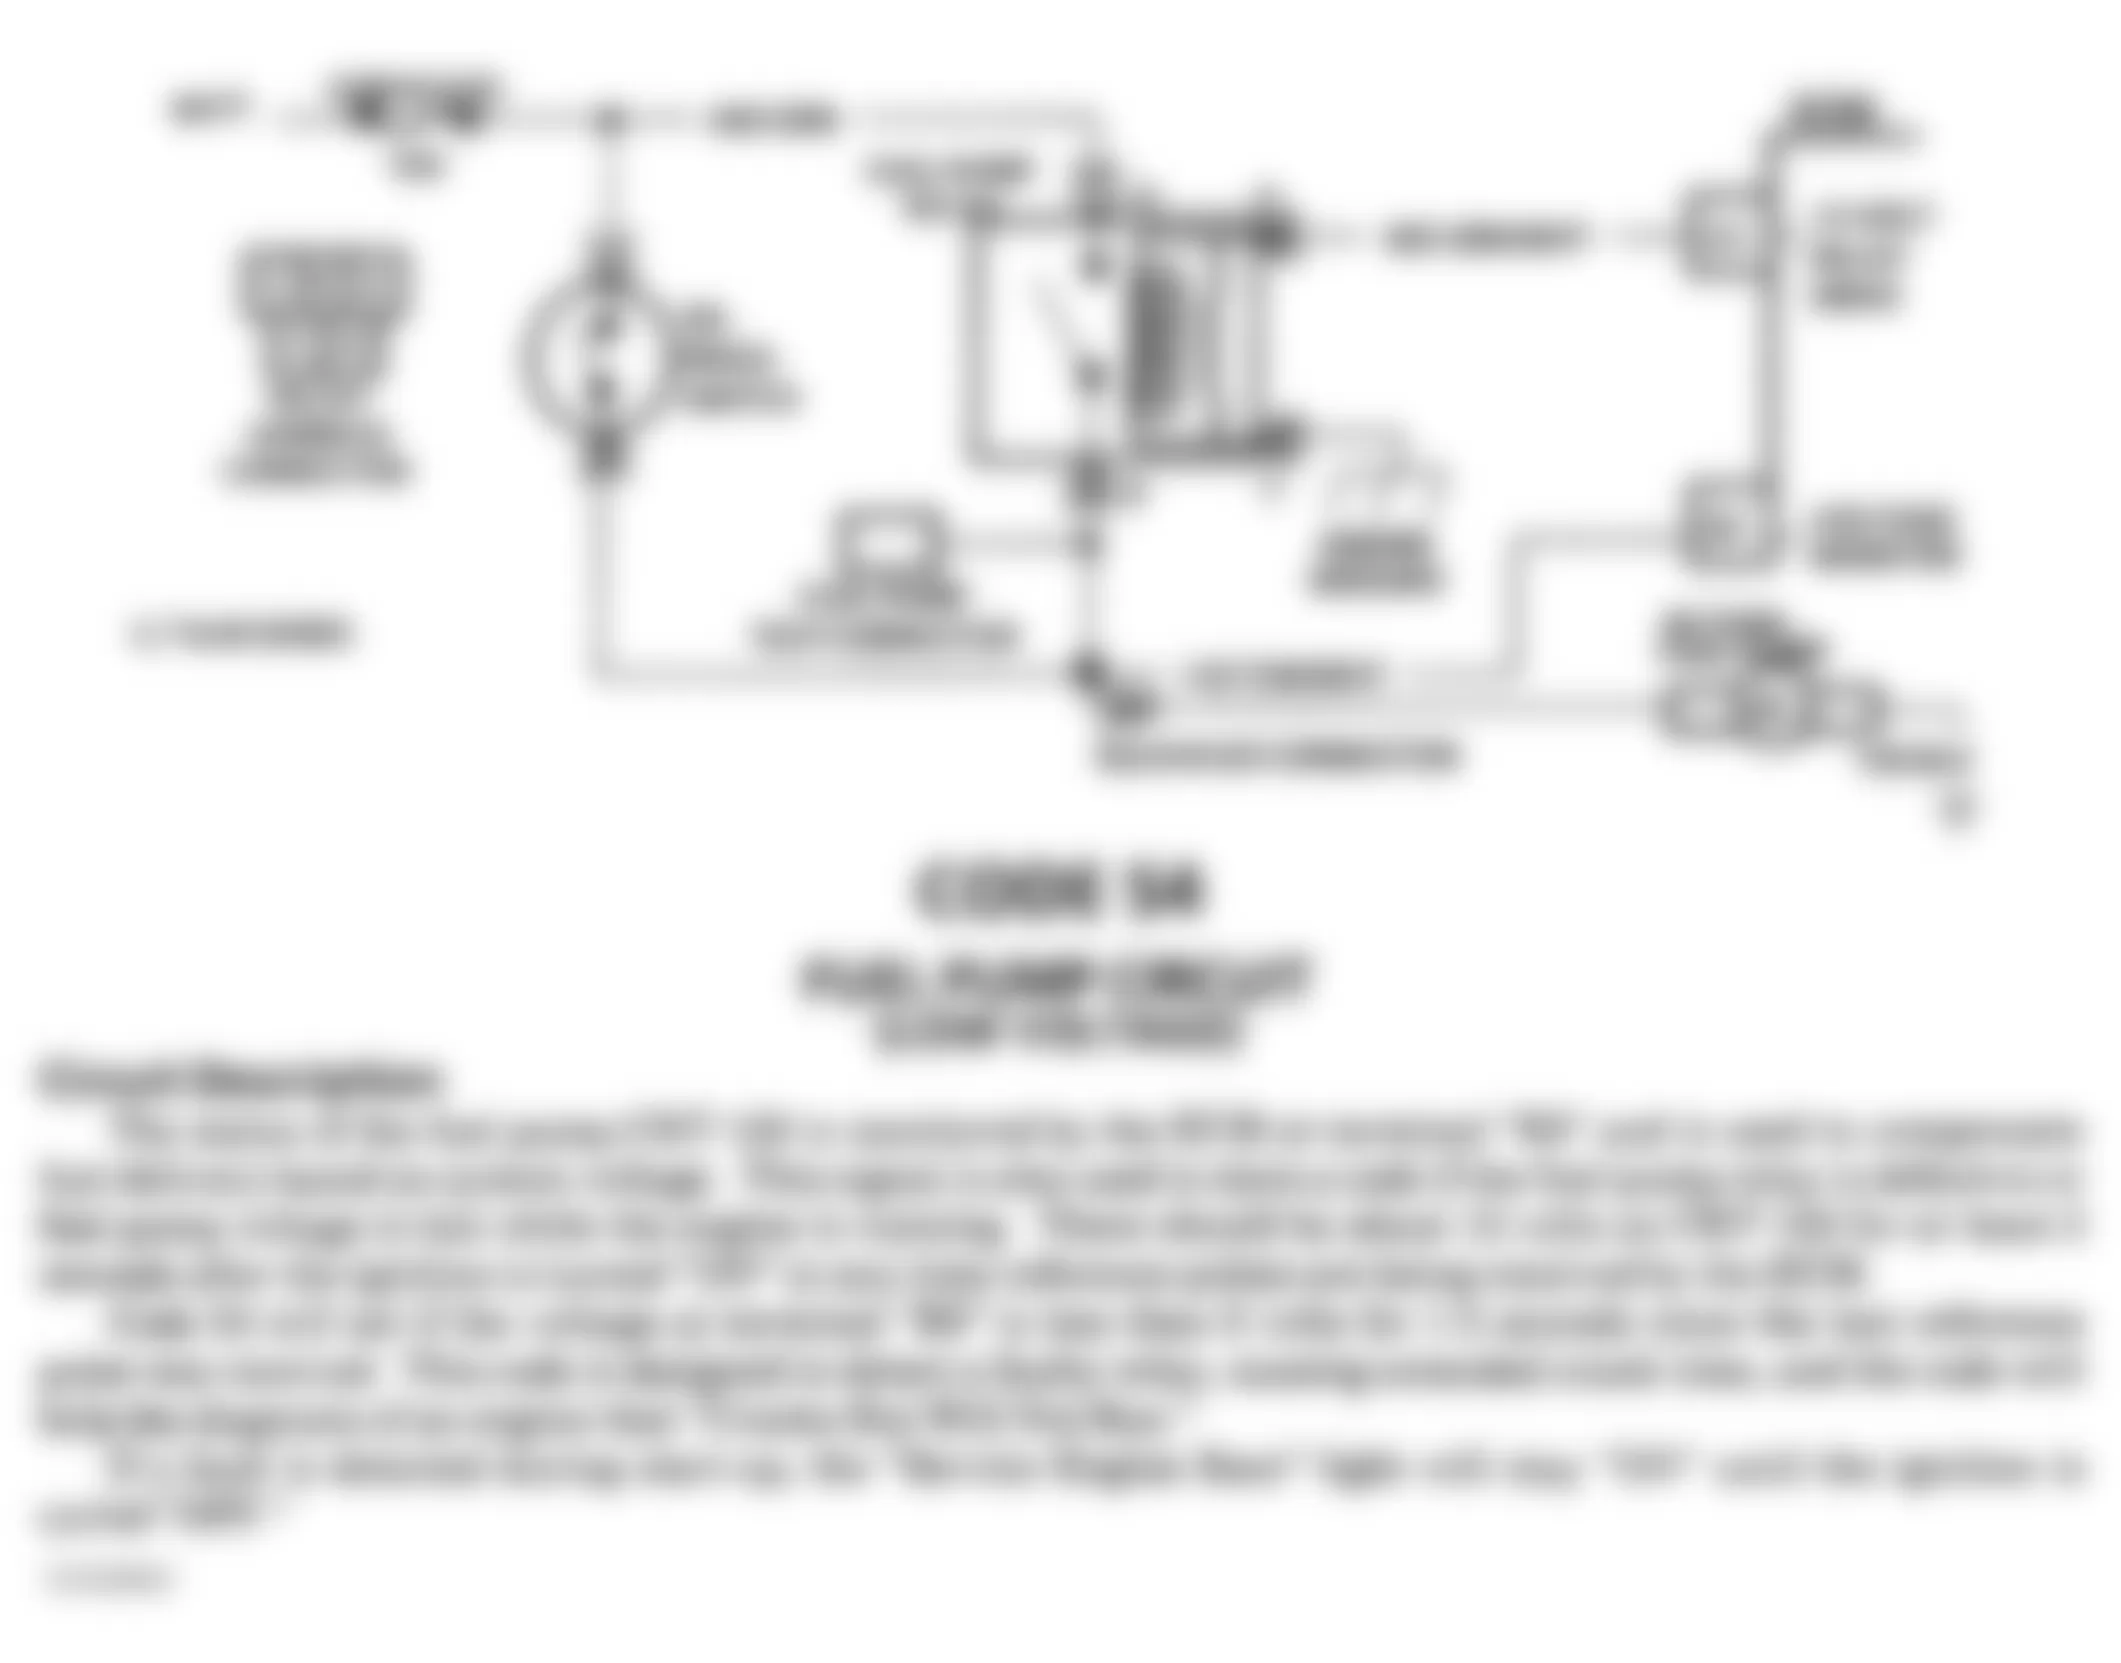 GMC S15 Jimmy 1991 - Component Locations -  Code 54 Schematic (S & T Series) Fuel Pump Circuit - With Circuit Description